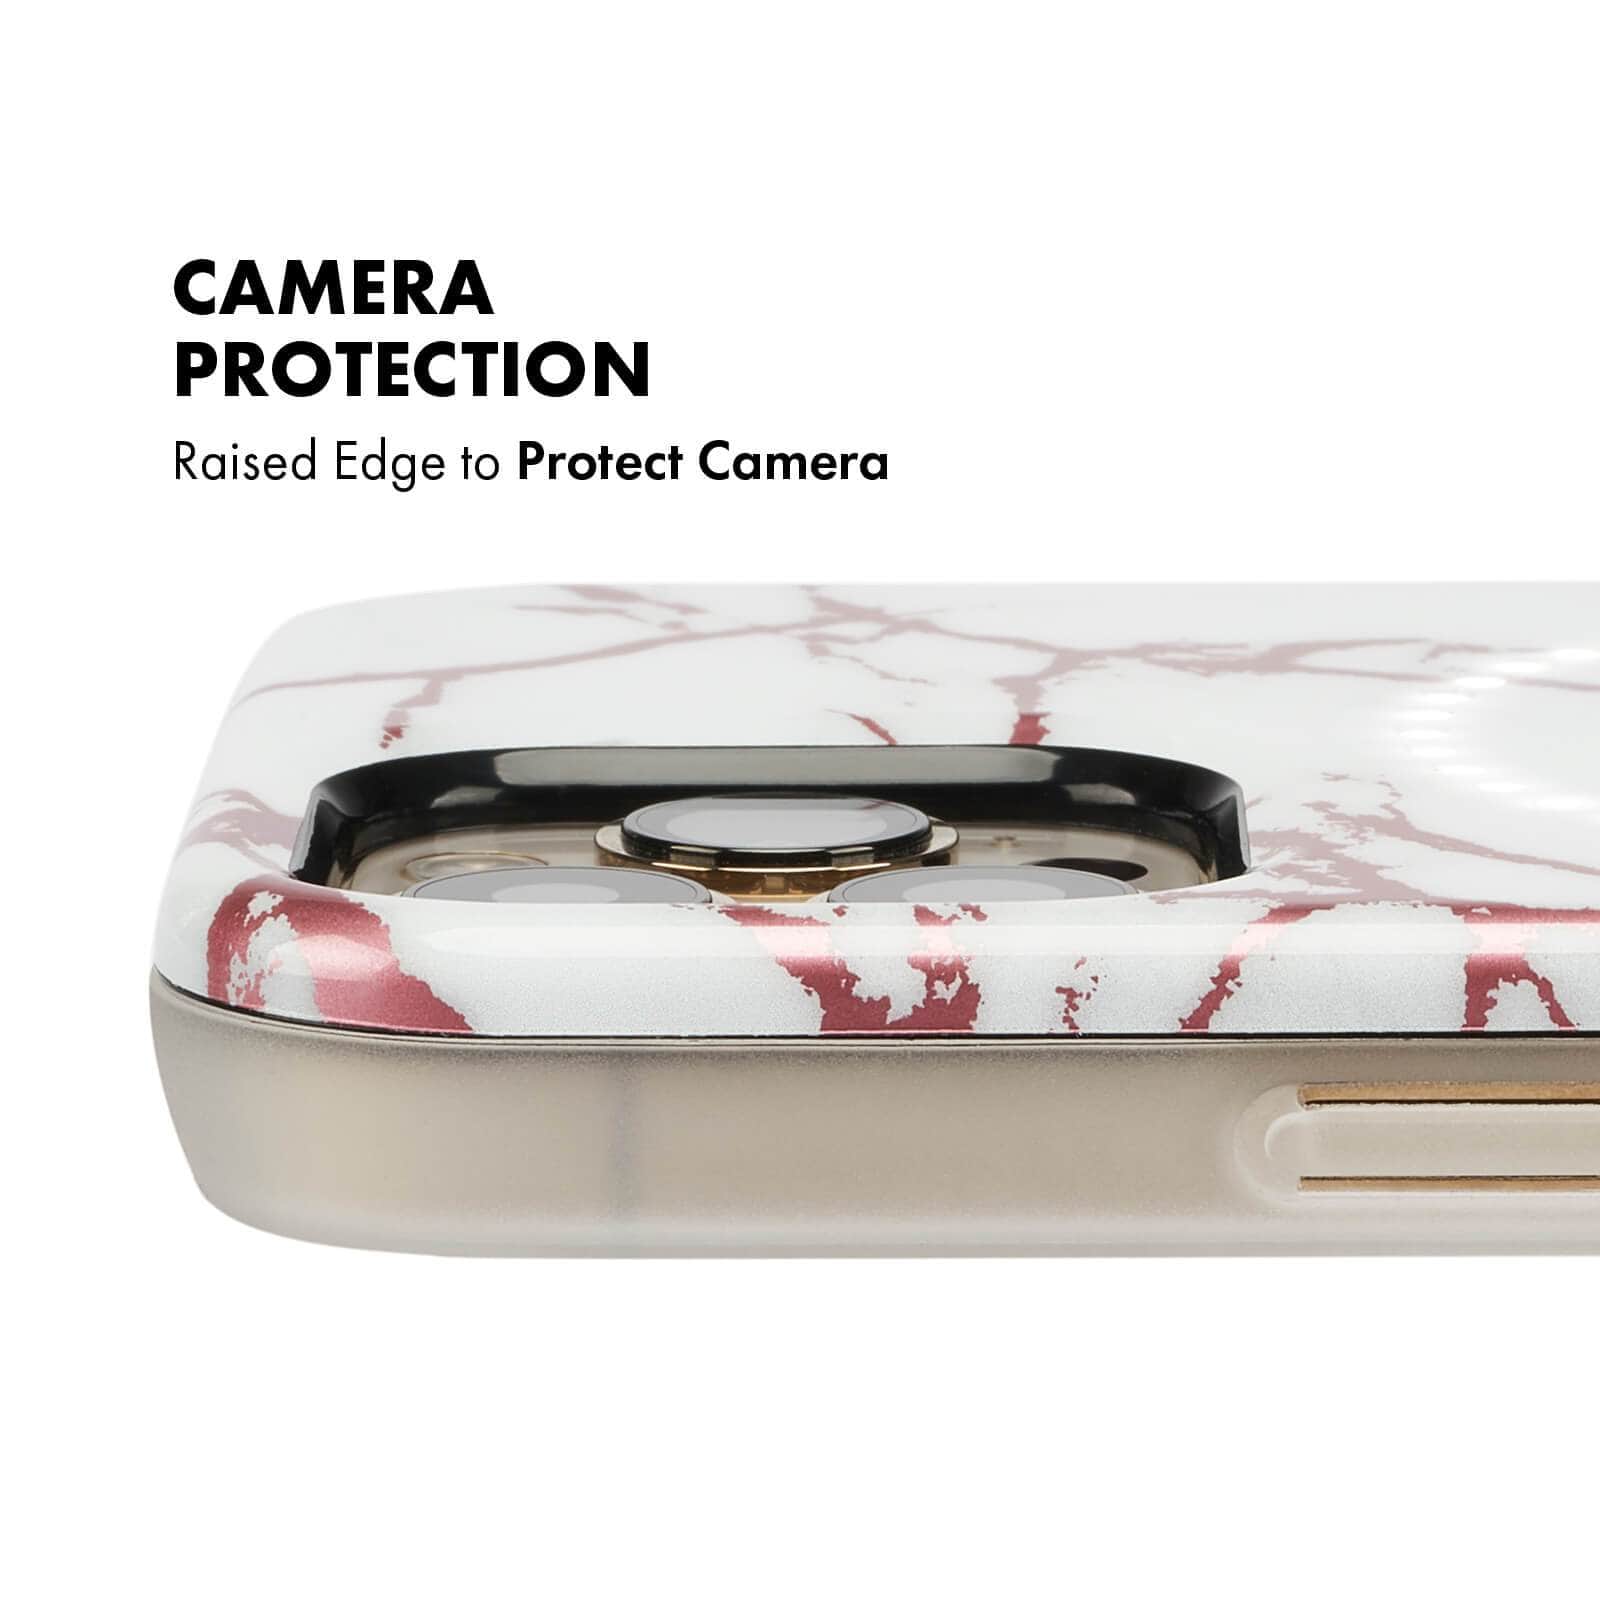 CAMERA PROTECTION RAISED EDGE TO PROTECT CAMERA color::Rose Metallic White Marble